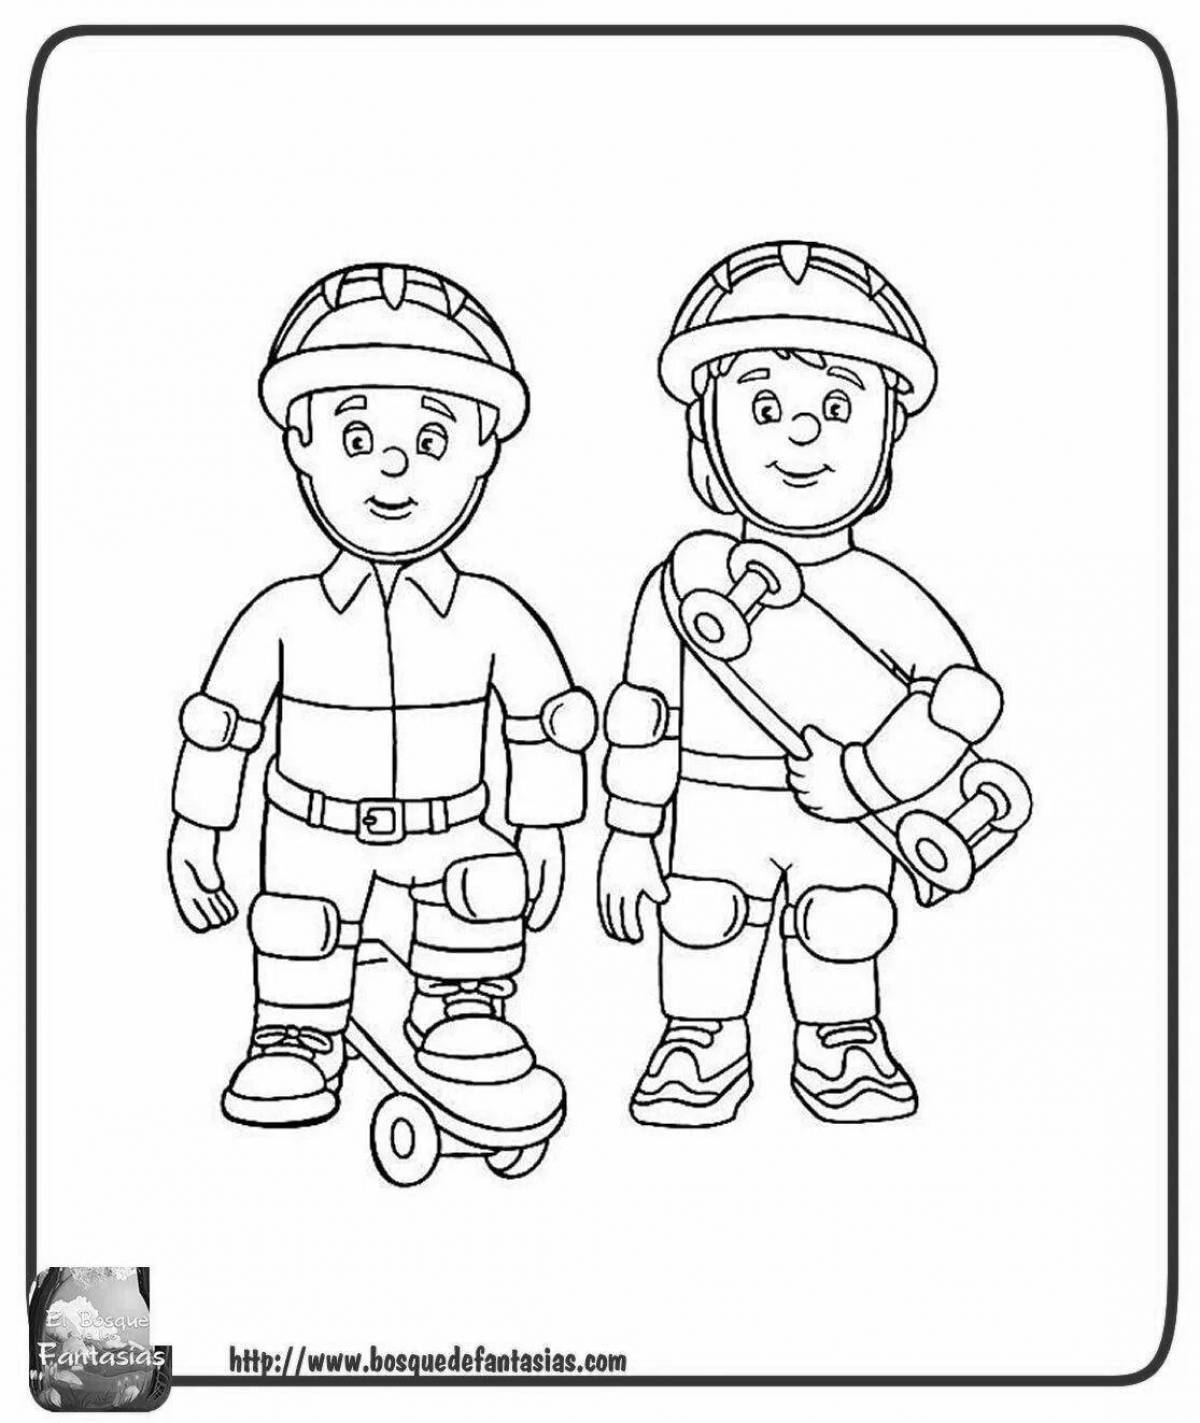 Creative drawing of a firefighter for children